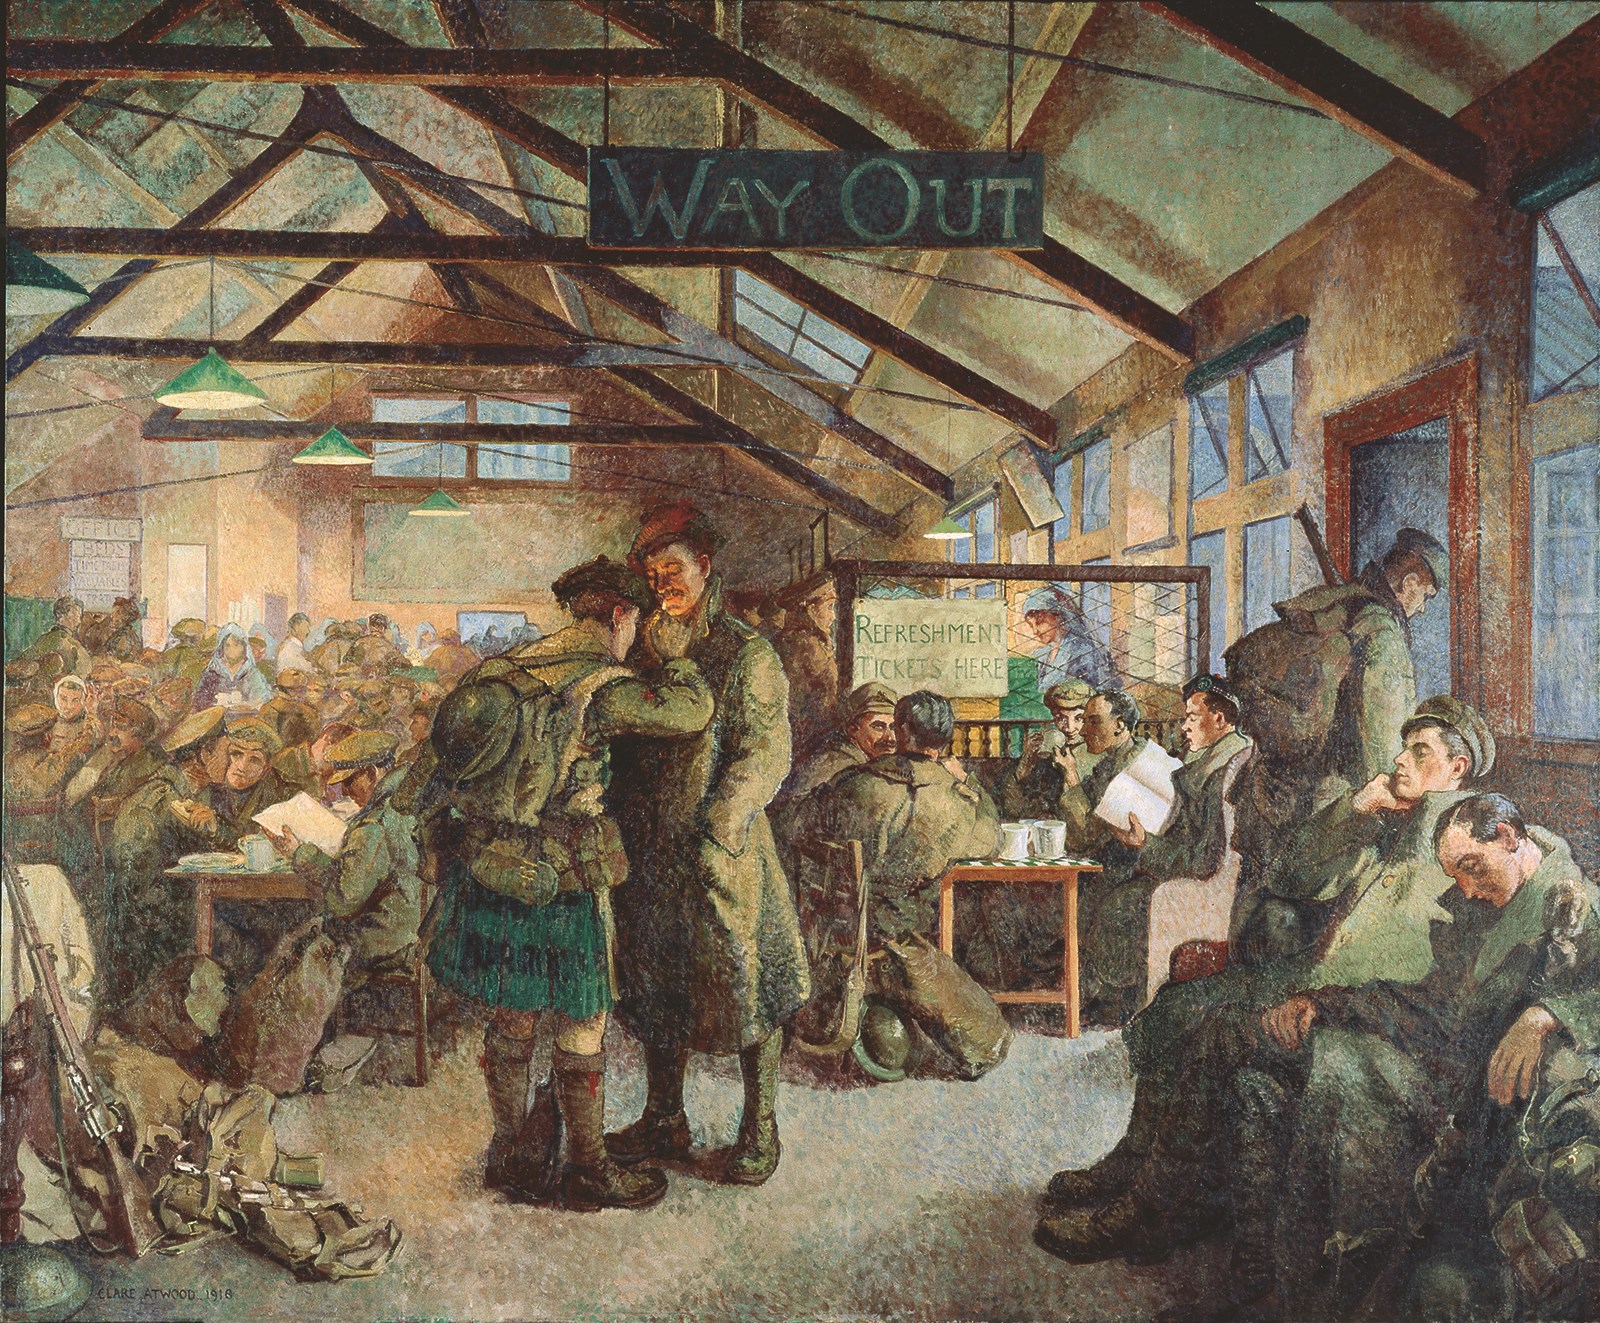 British painter Clare Atwood showed soldiers on leave in 1917, crowding a train station as they return to the Western Front. Although female artists were not allowed to document the battlefield, Atwood captured a revealing aspect of the exhausting conflict in this depiction of wartime London. (Beaverbrook Collection of War Art, Canadian War Museum, CWM 19710261-0017)